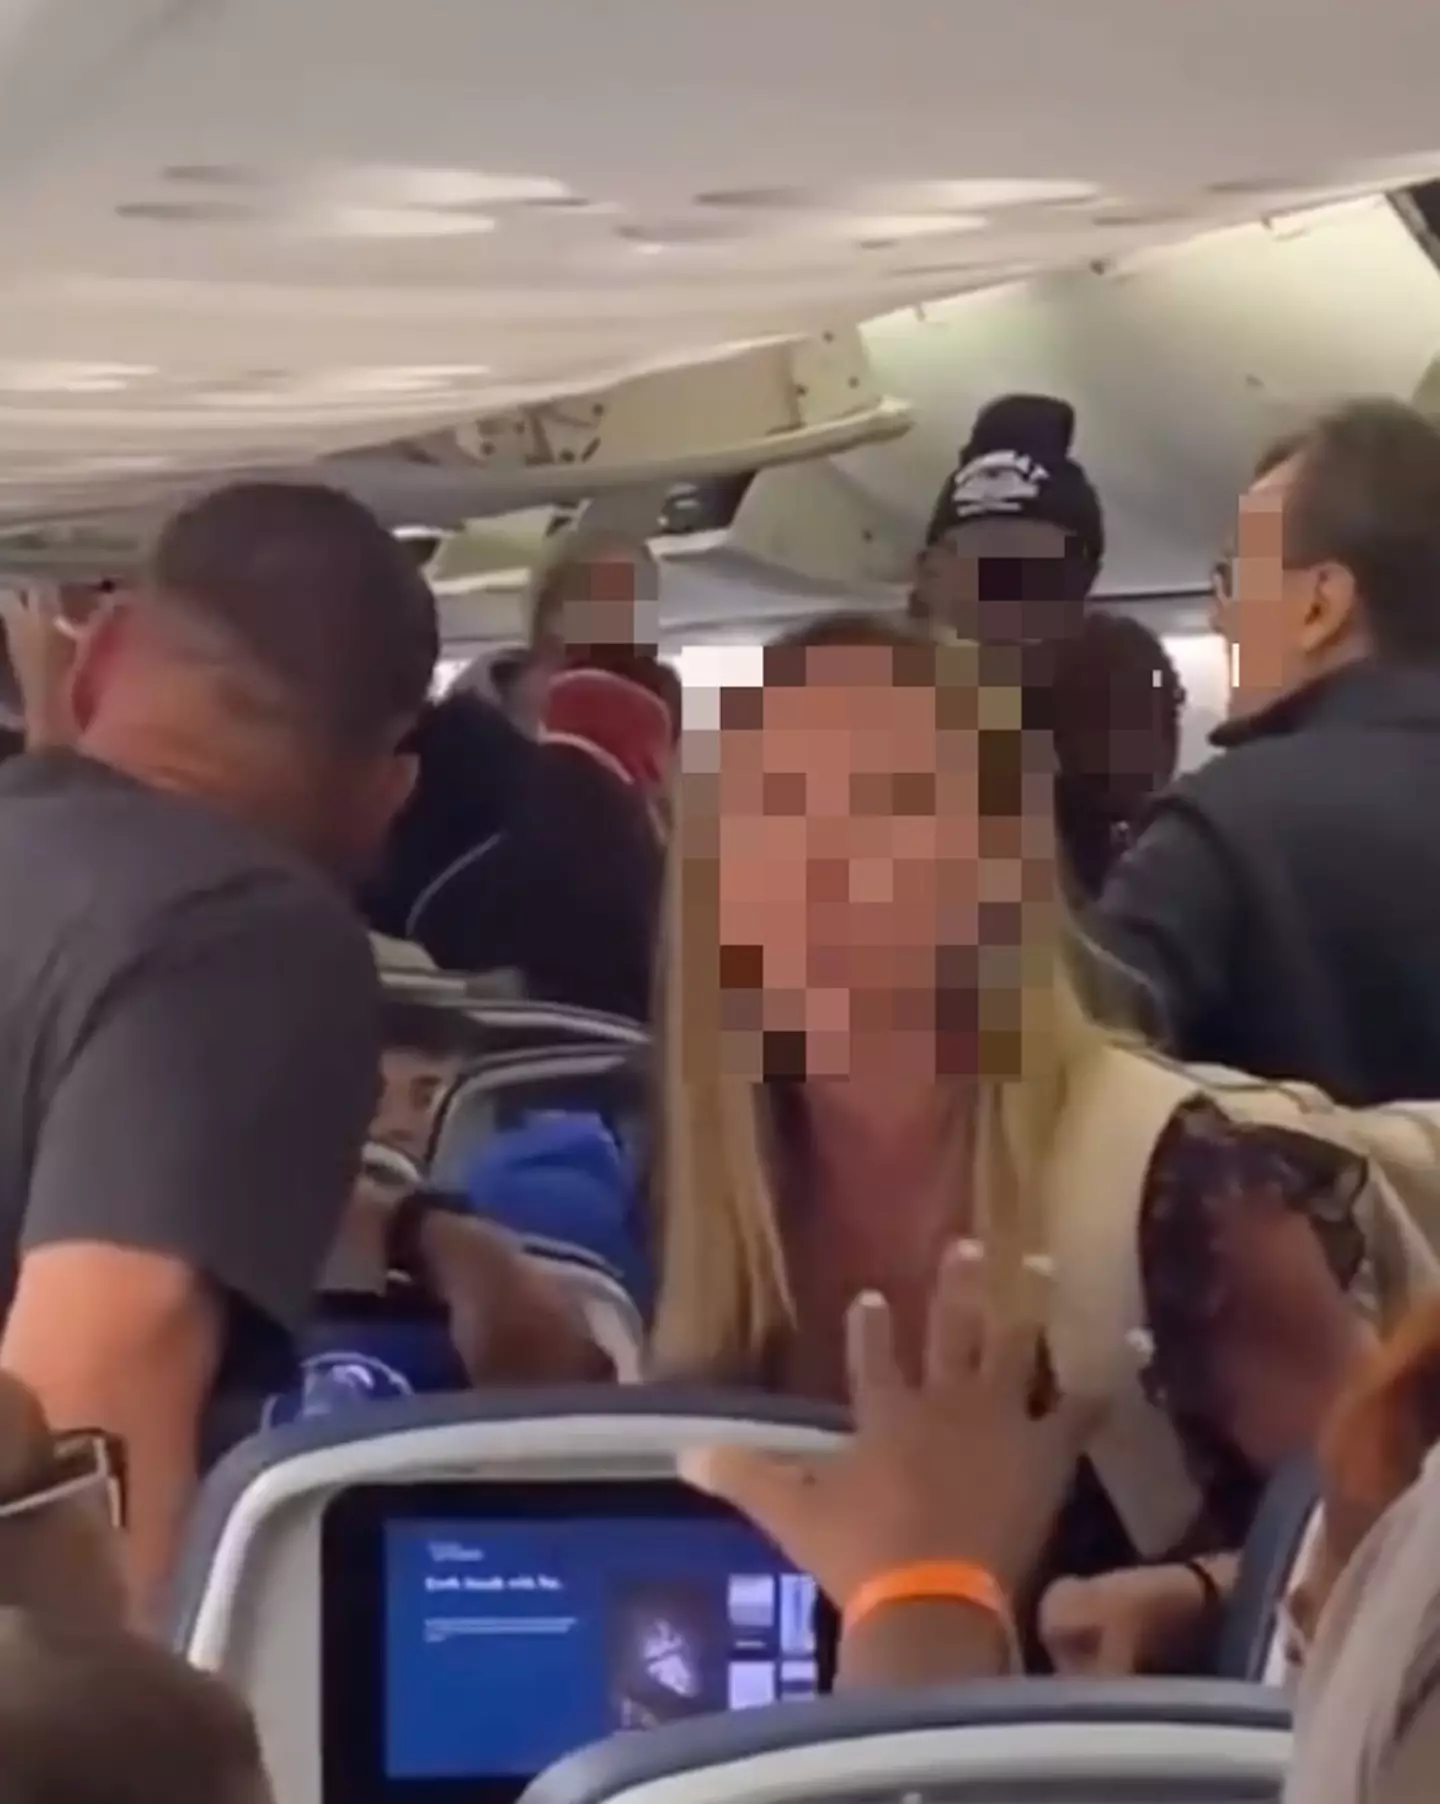 The woman accused the passenger behind her of repeatedly kicking her seat when she reclined it.